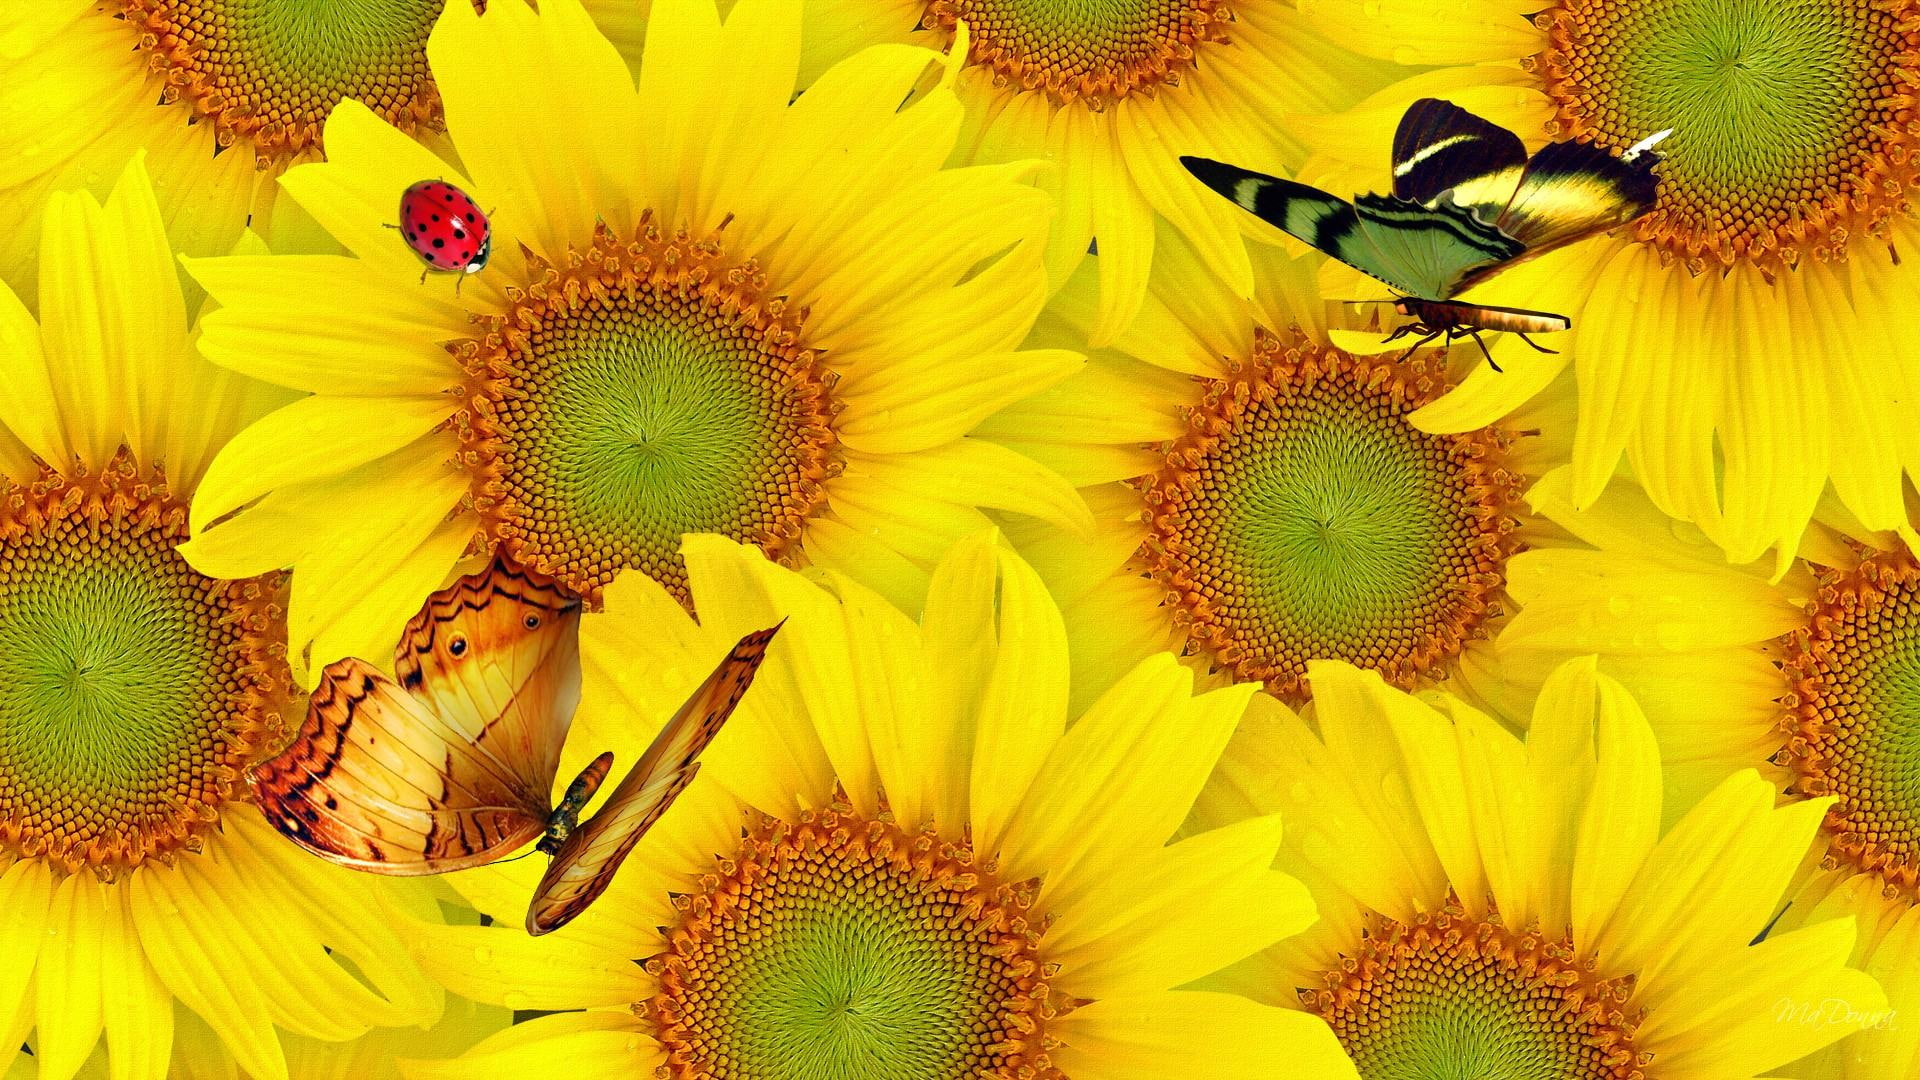 Wall Of Sunflowers, yellow, fall, lady bug, bright, summer, butterflies